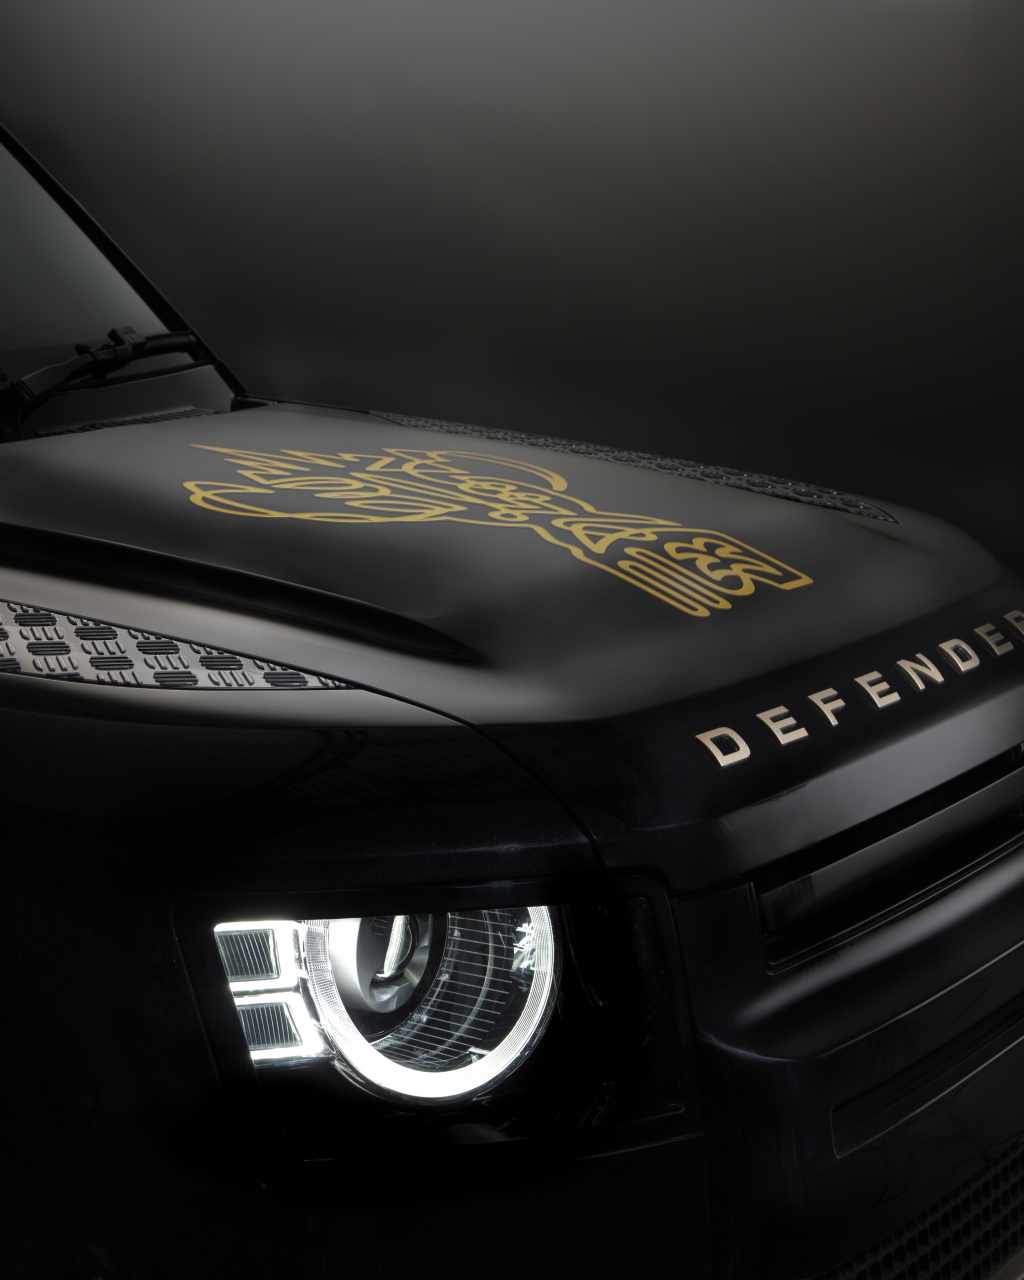 A shot of the bonnet of the Defender 110 with graphics of the Rugby World Cup 2023 applied to the bonnet